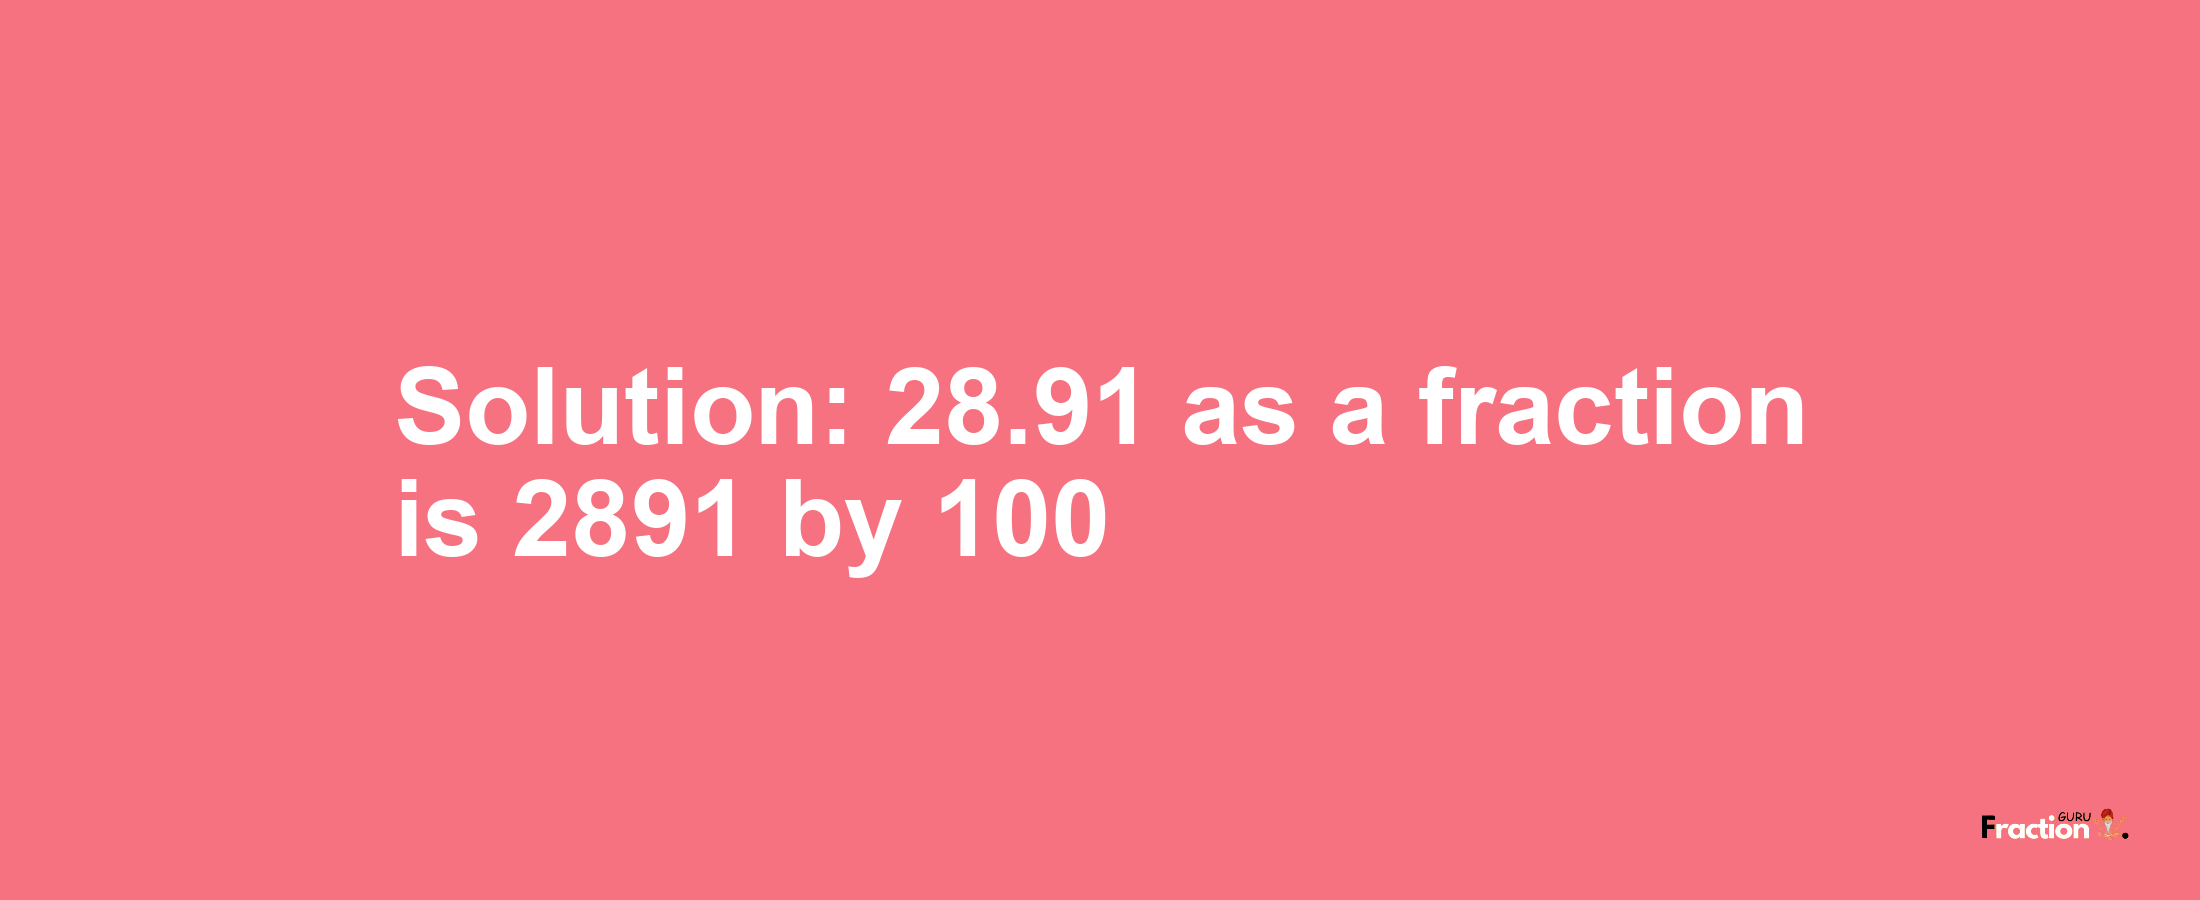 Solution:28.91 as a fraction is 2891/100